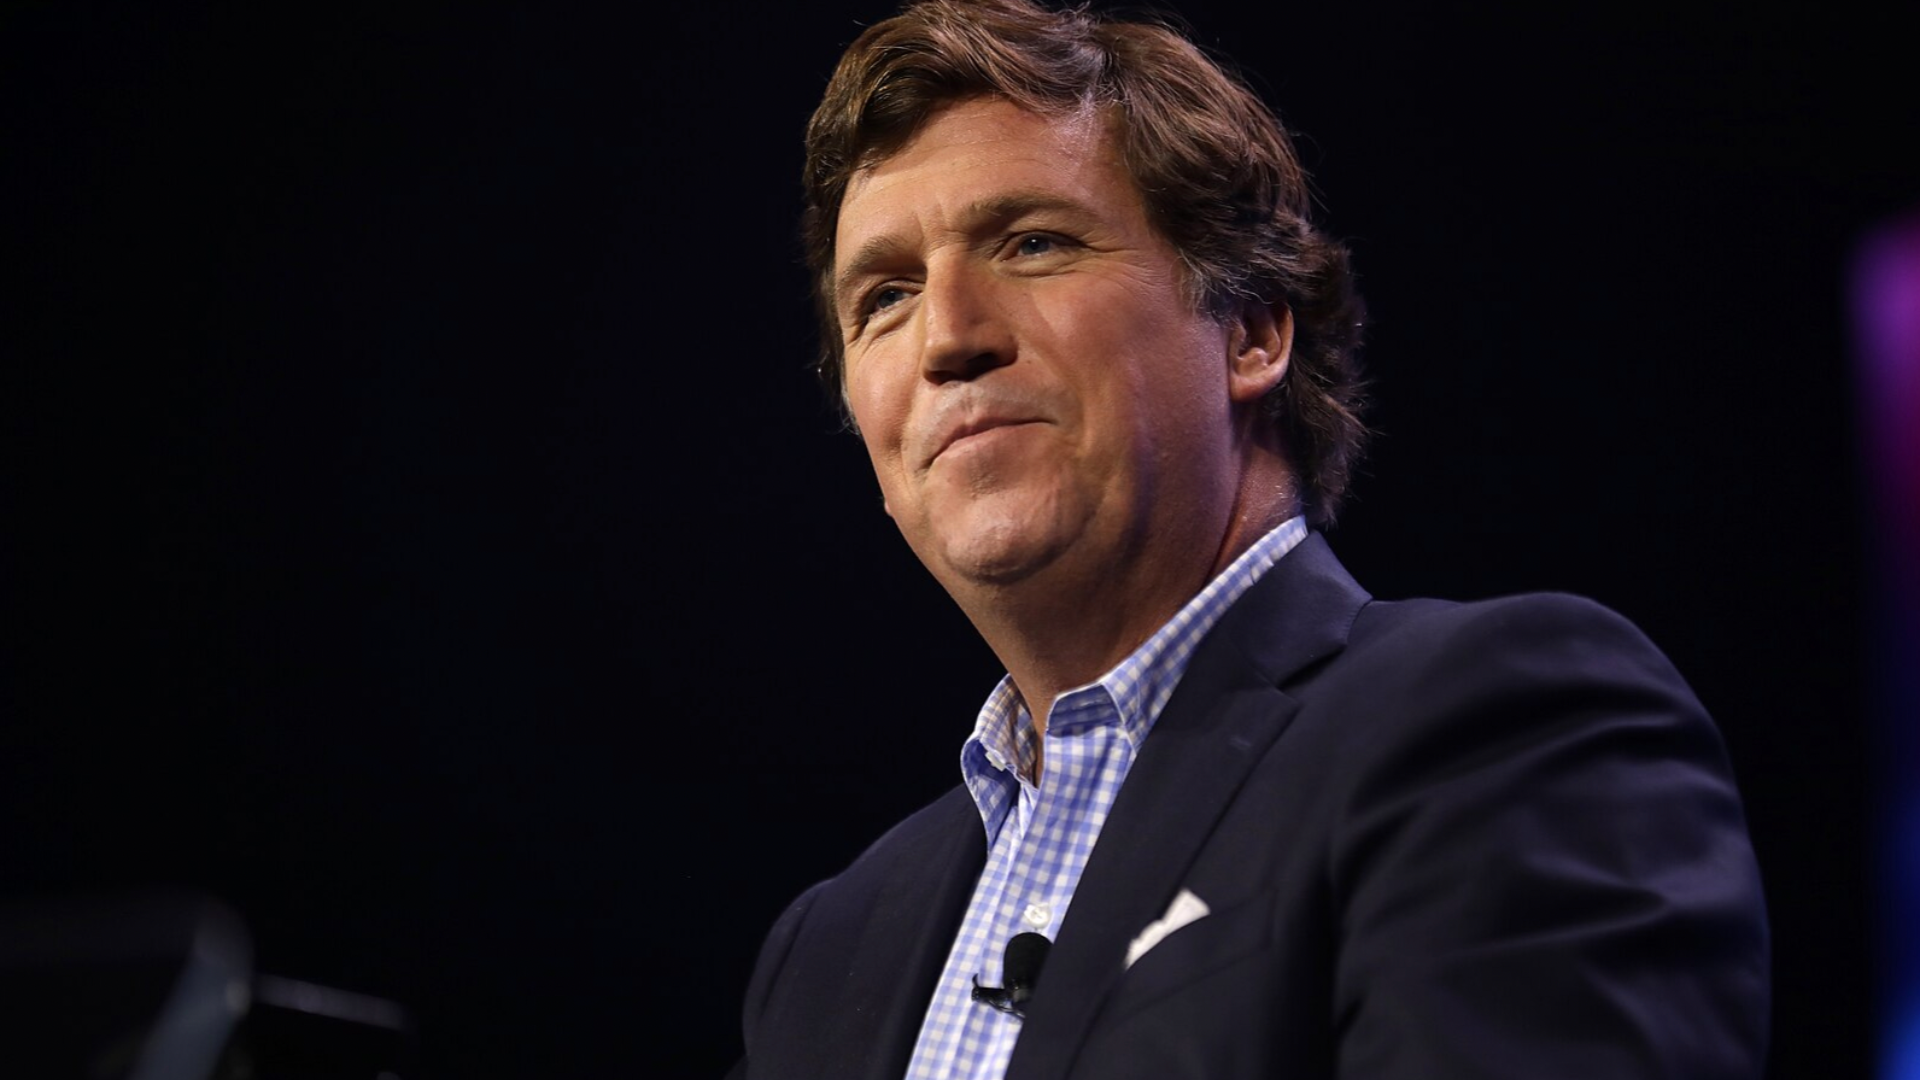 Tucker Carlson Network Parks Billboard Trucks At Major News Outlets Proclaiming 'Corporate Media Is Dead'